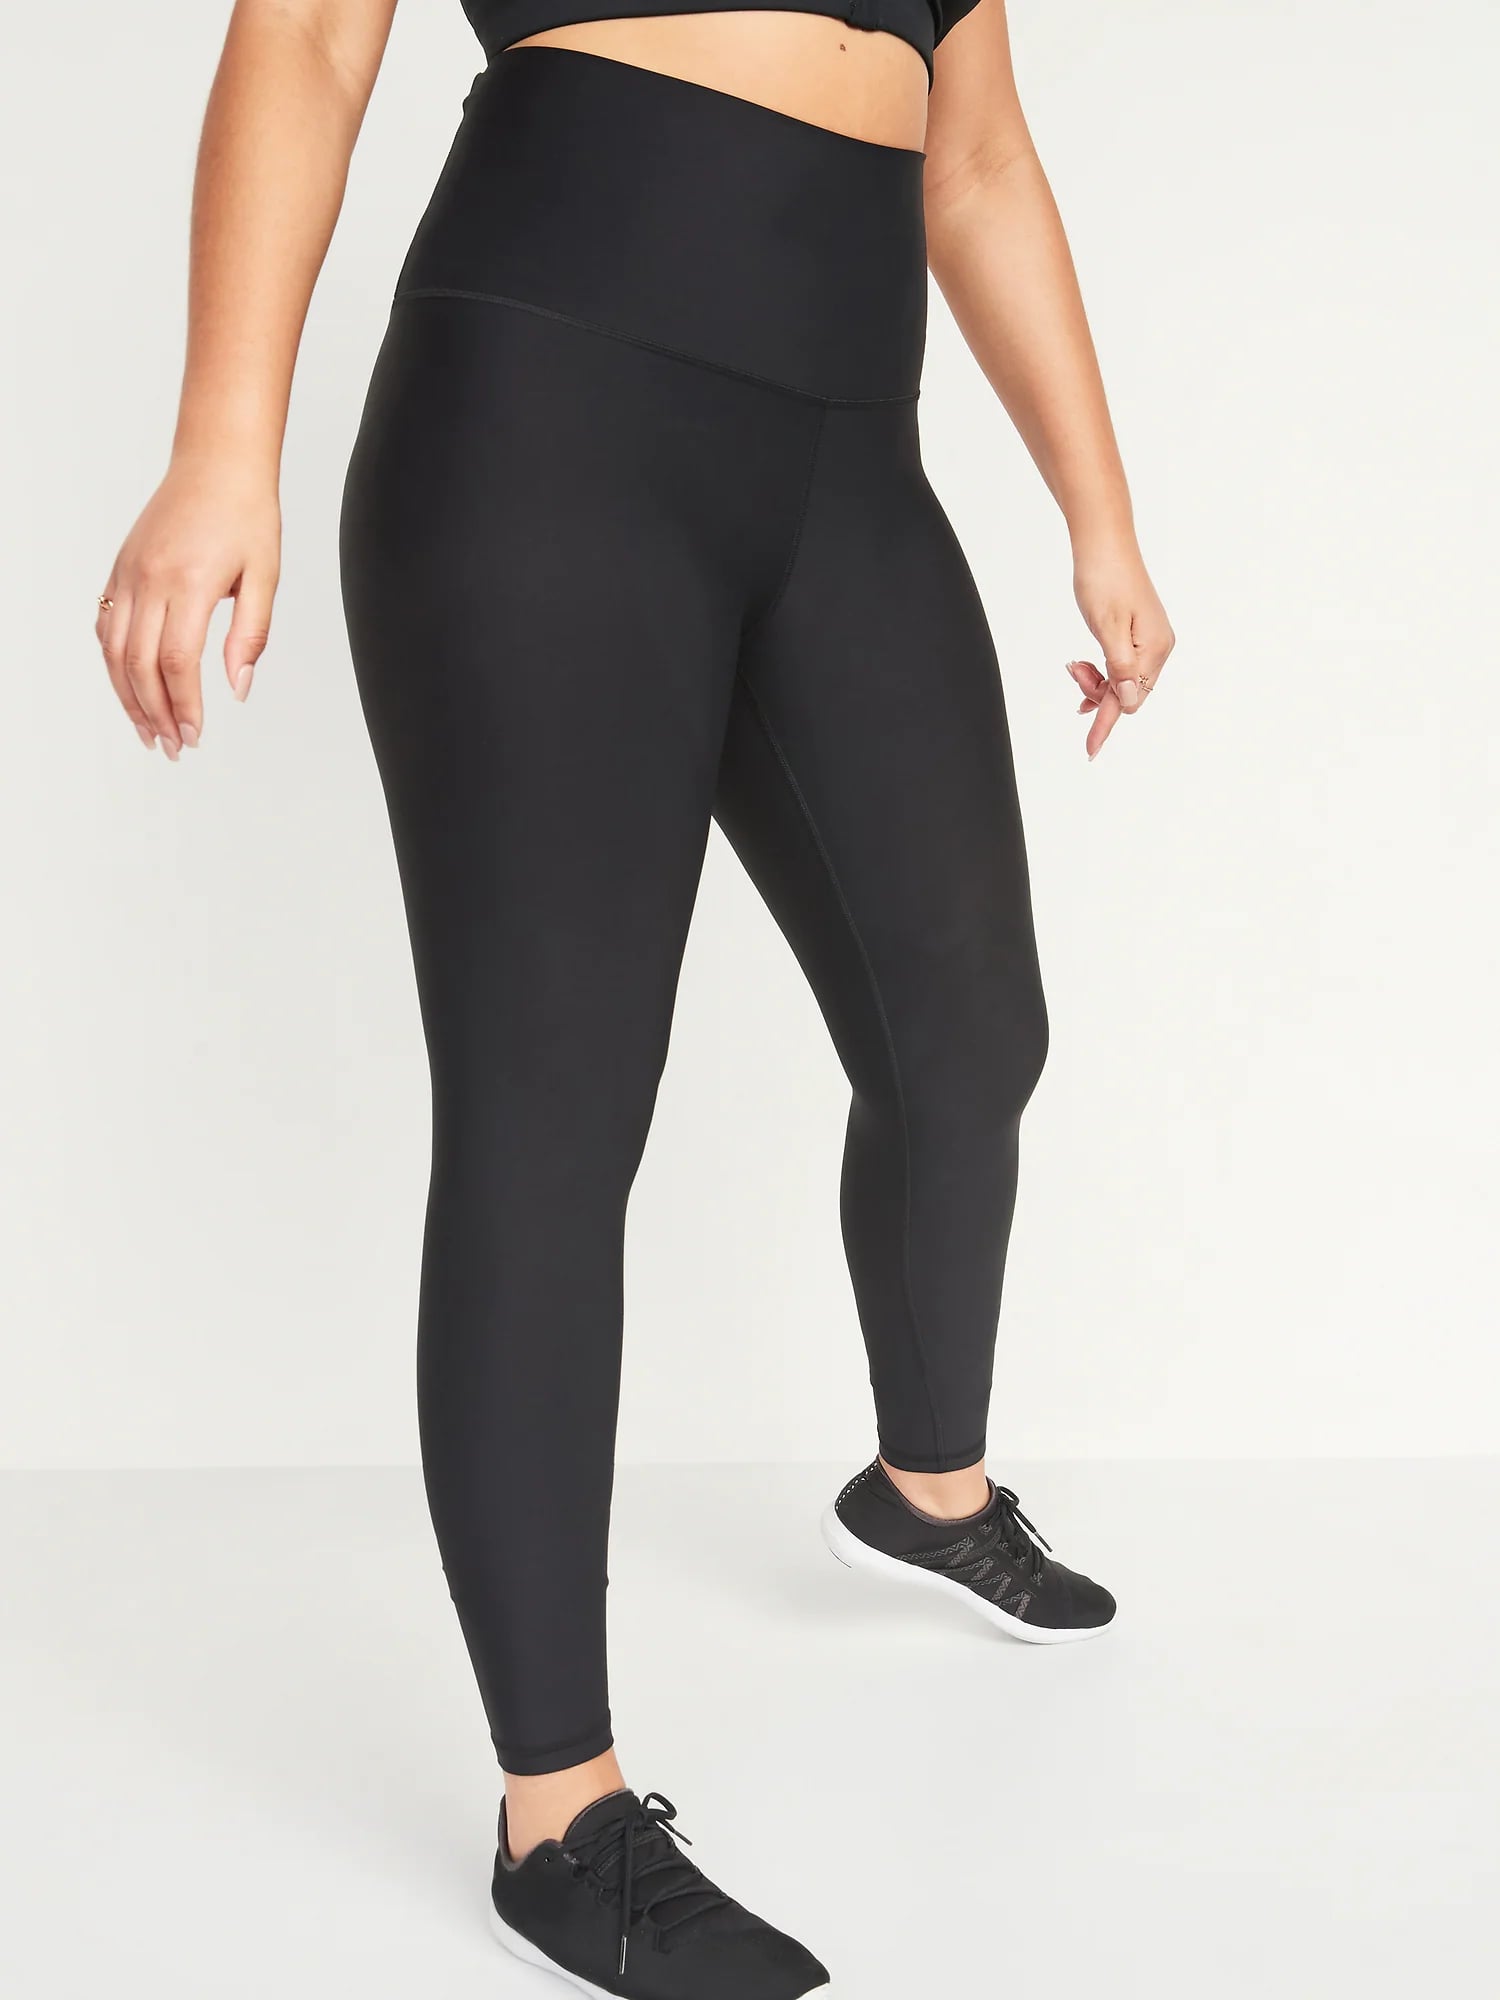 Did Old Navy Weave Its Activewear With Magic? Because These